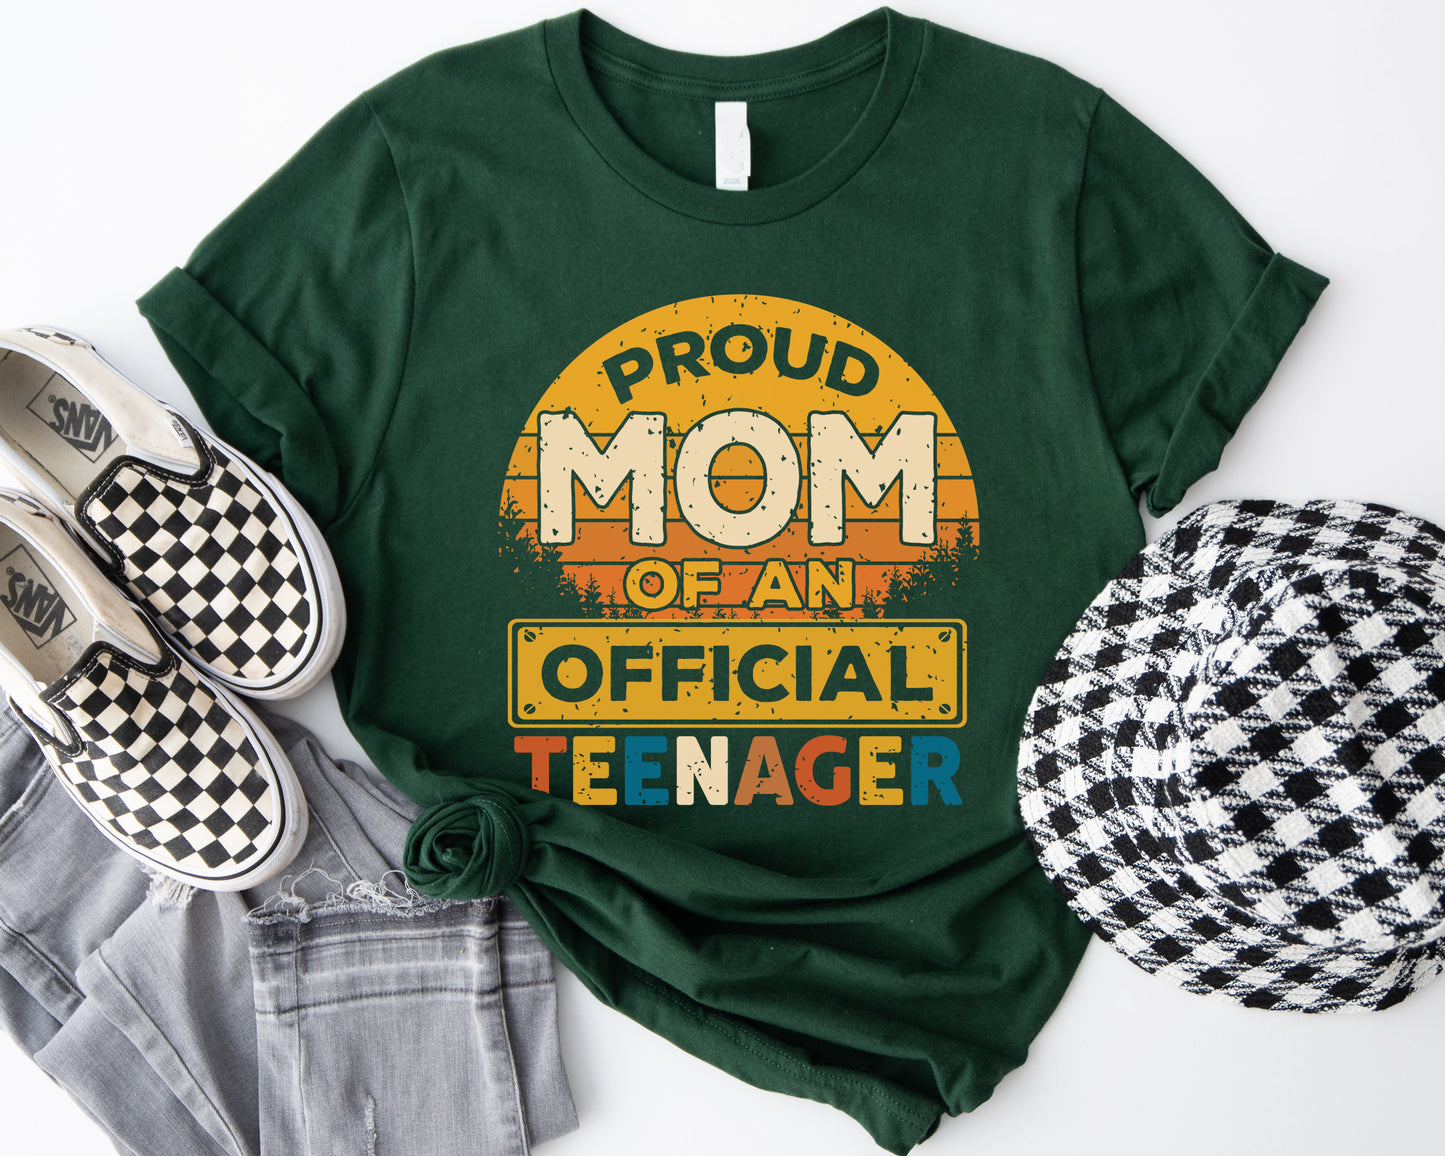 Retro Sunset Proud MOM of An Official Teenager Tee - Retro Style T-shirt Design | Mother's Day | Graduation day | Coming-of-age Ceremony - Forest green